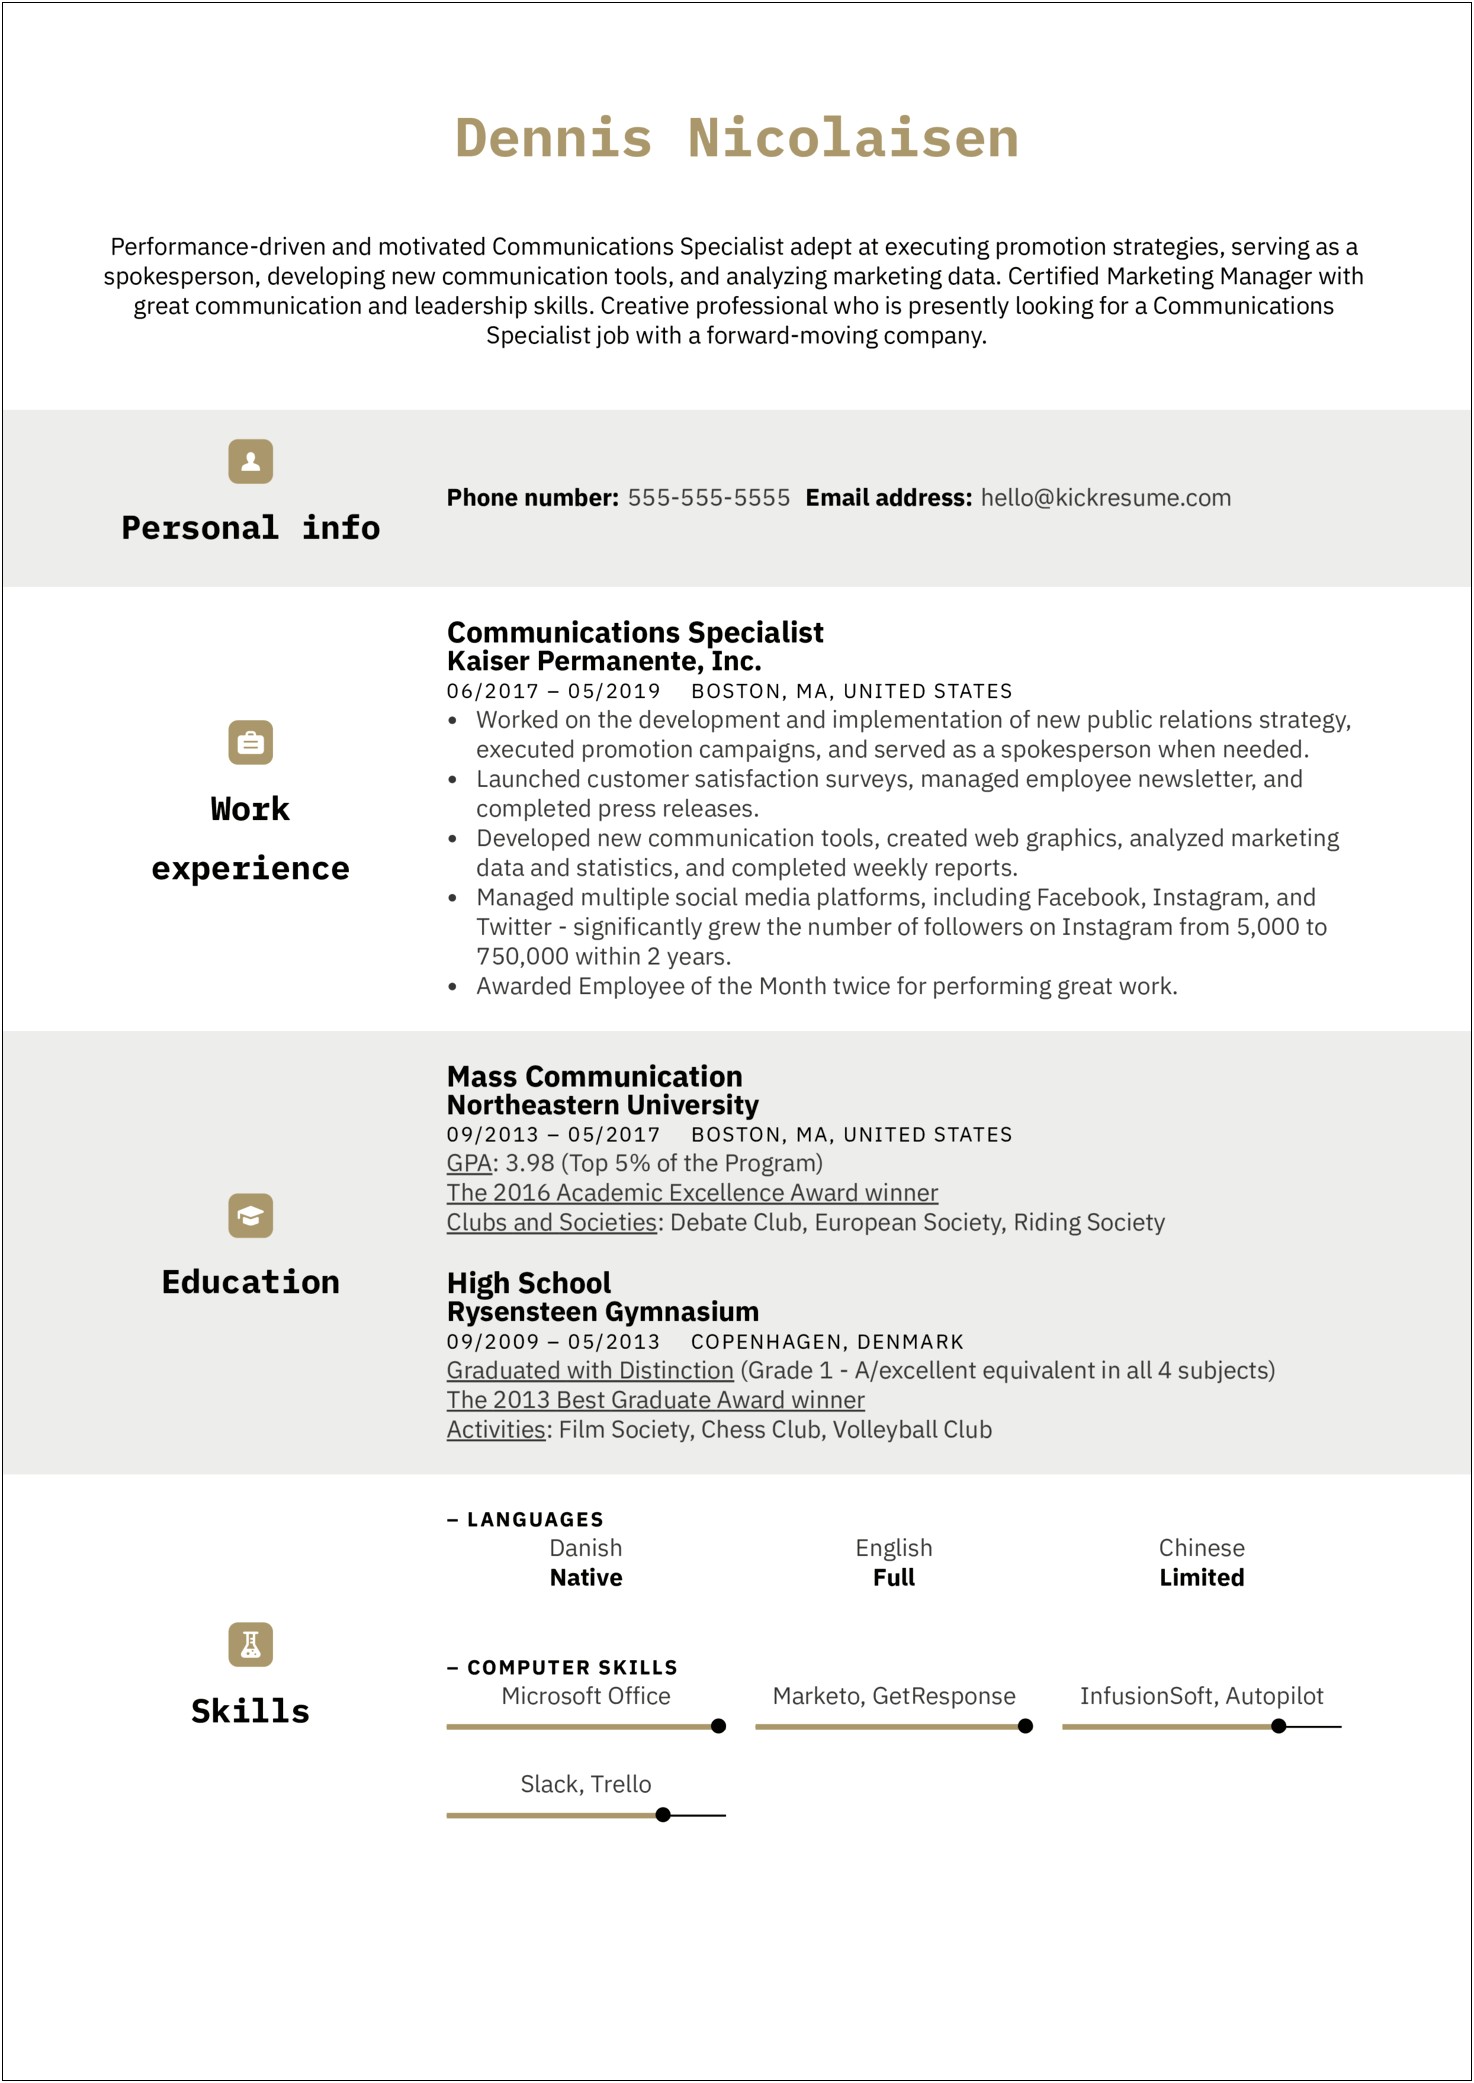 Example Of Interpersonal Skills On A Resume